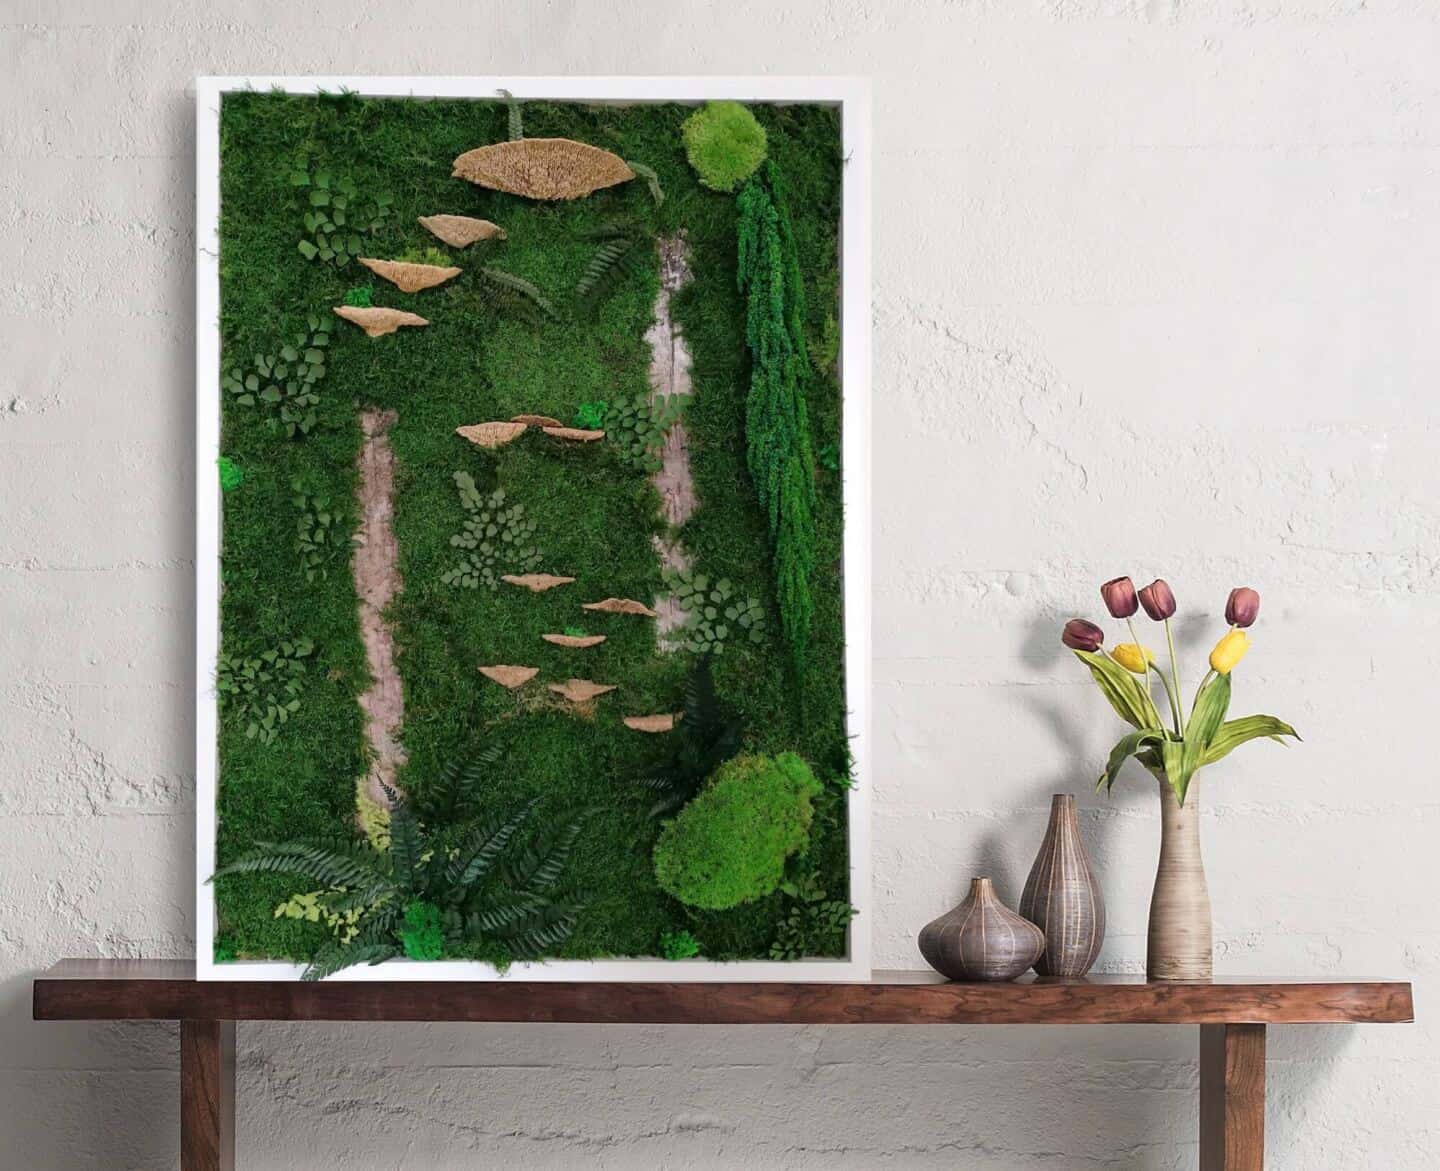 Framed preserved botanical art made from moss propped on a bench next to some flowers.